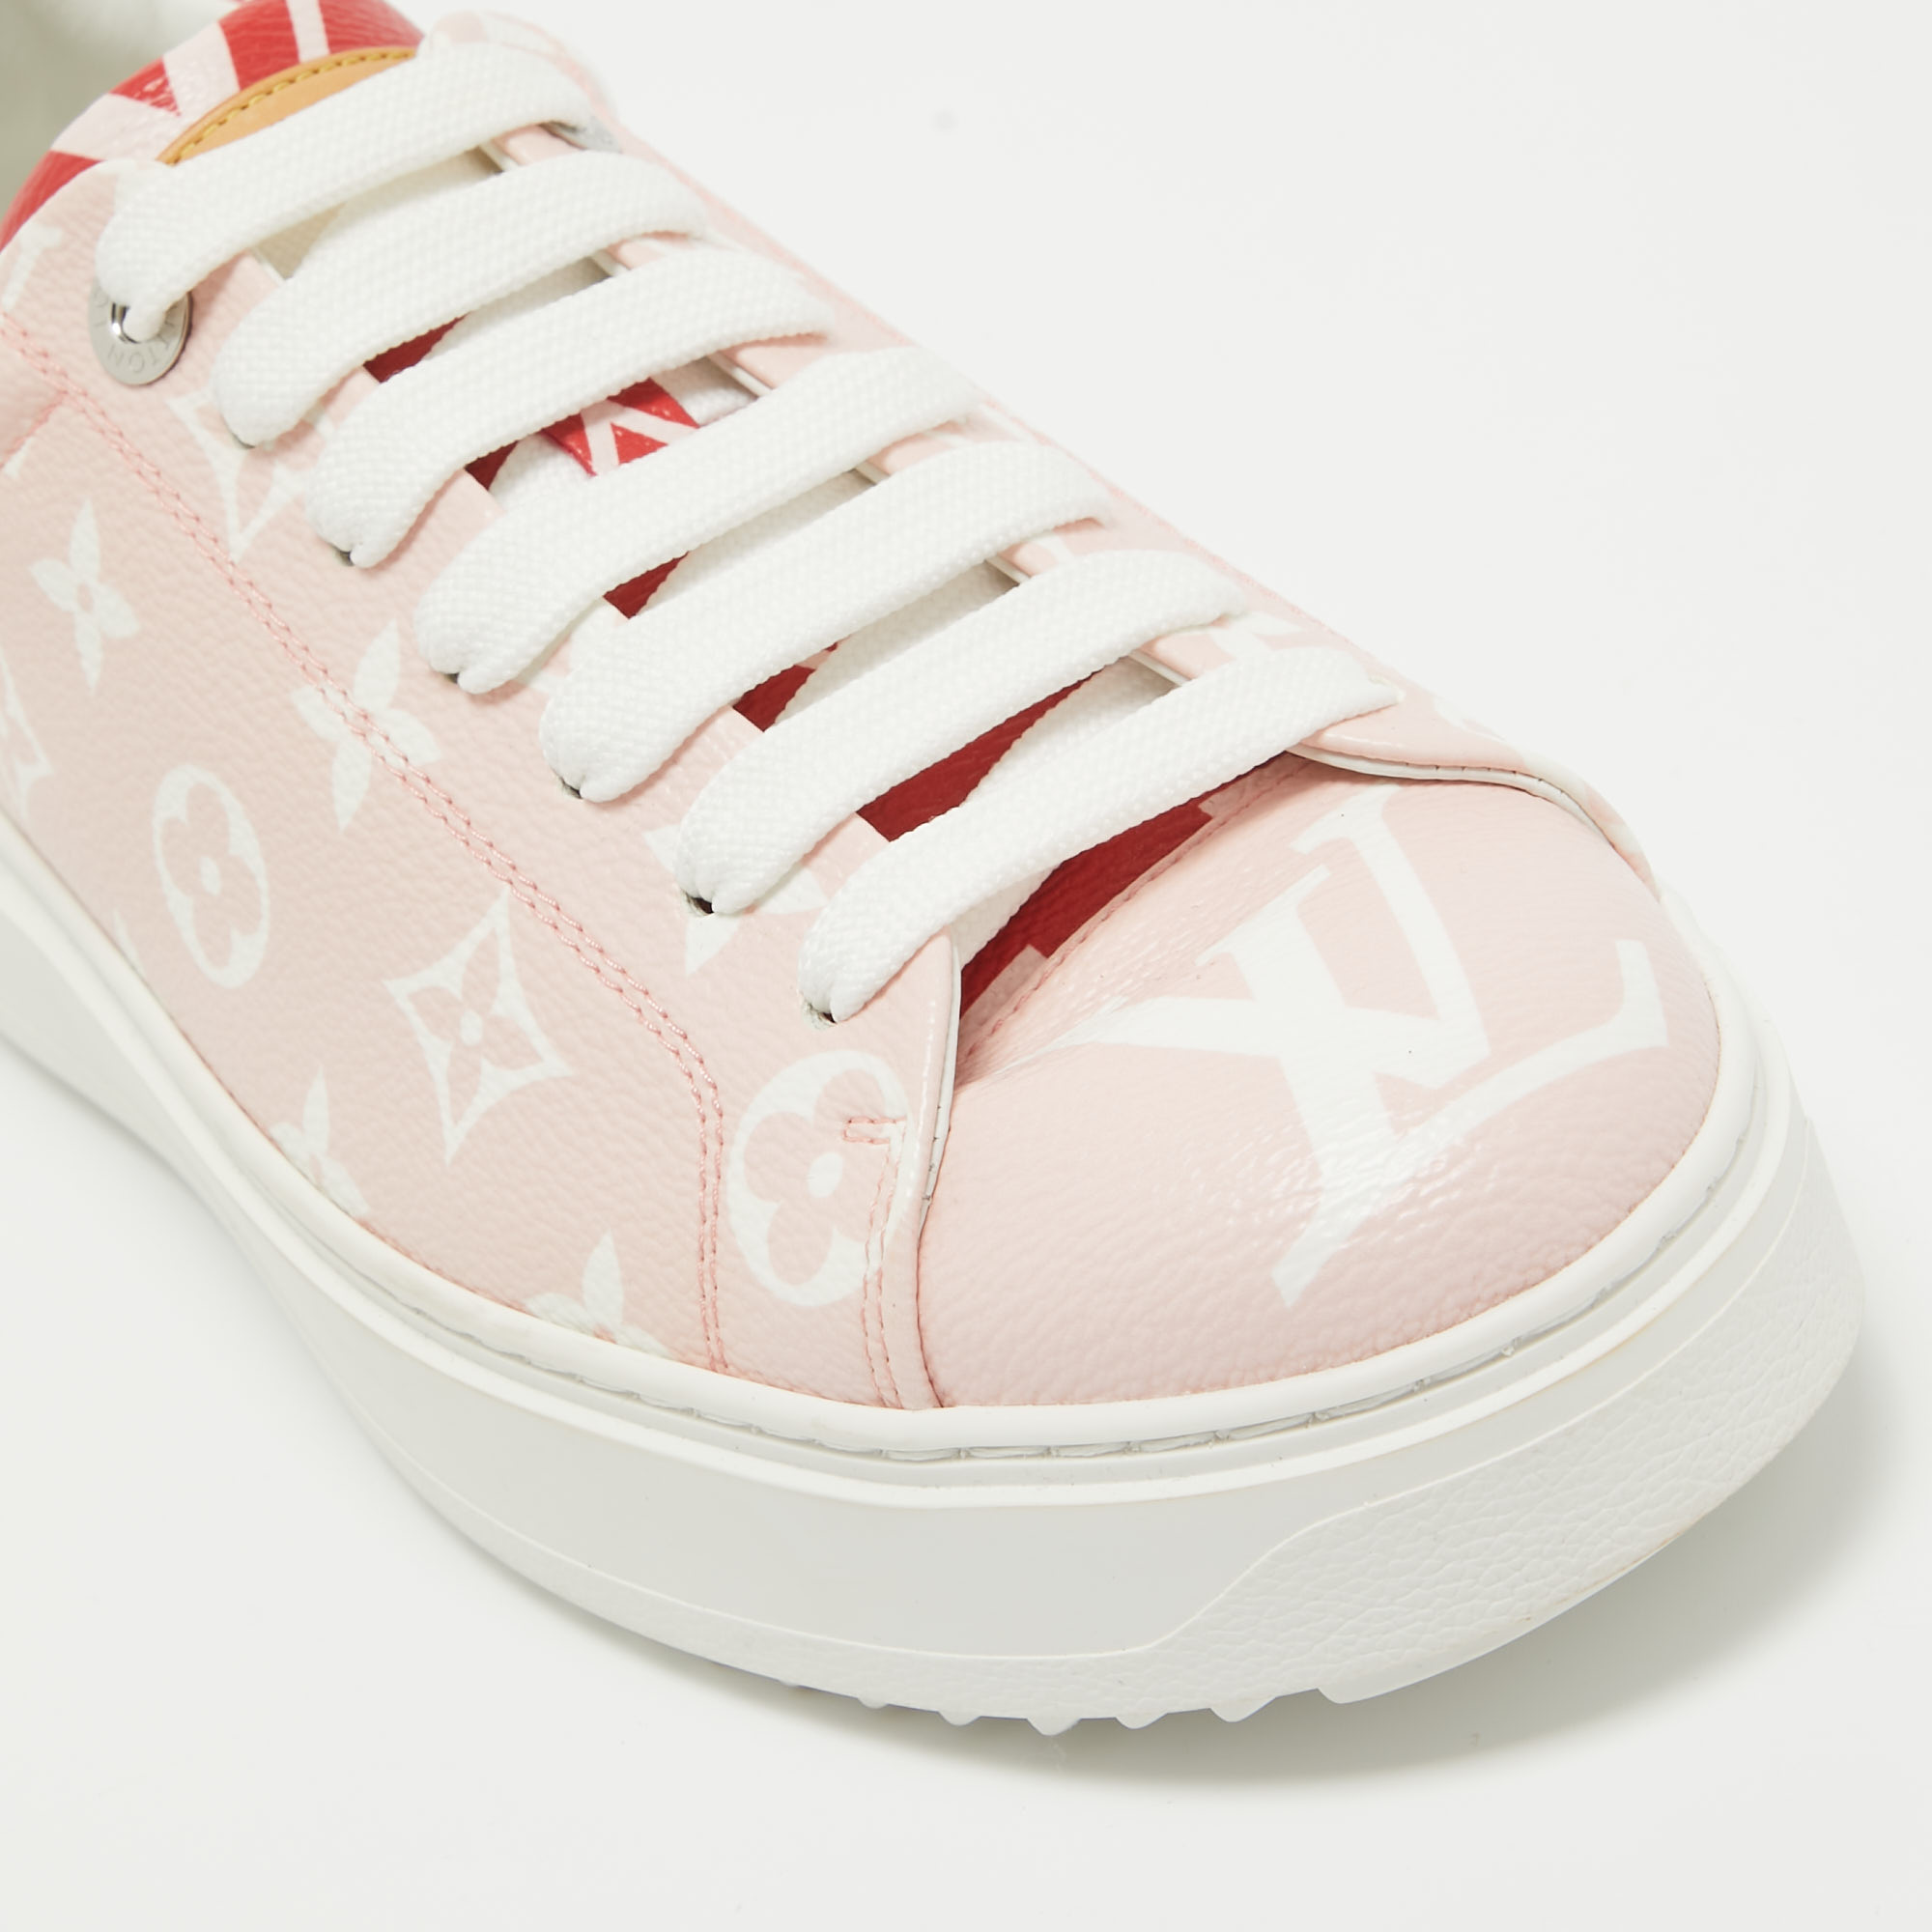 Louis Vuitton Pink Monogram Canvas Time Out Sneakers Size 40